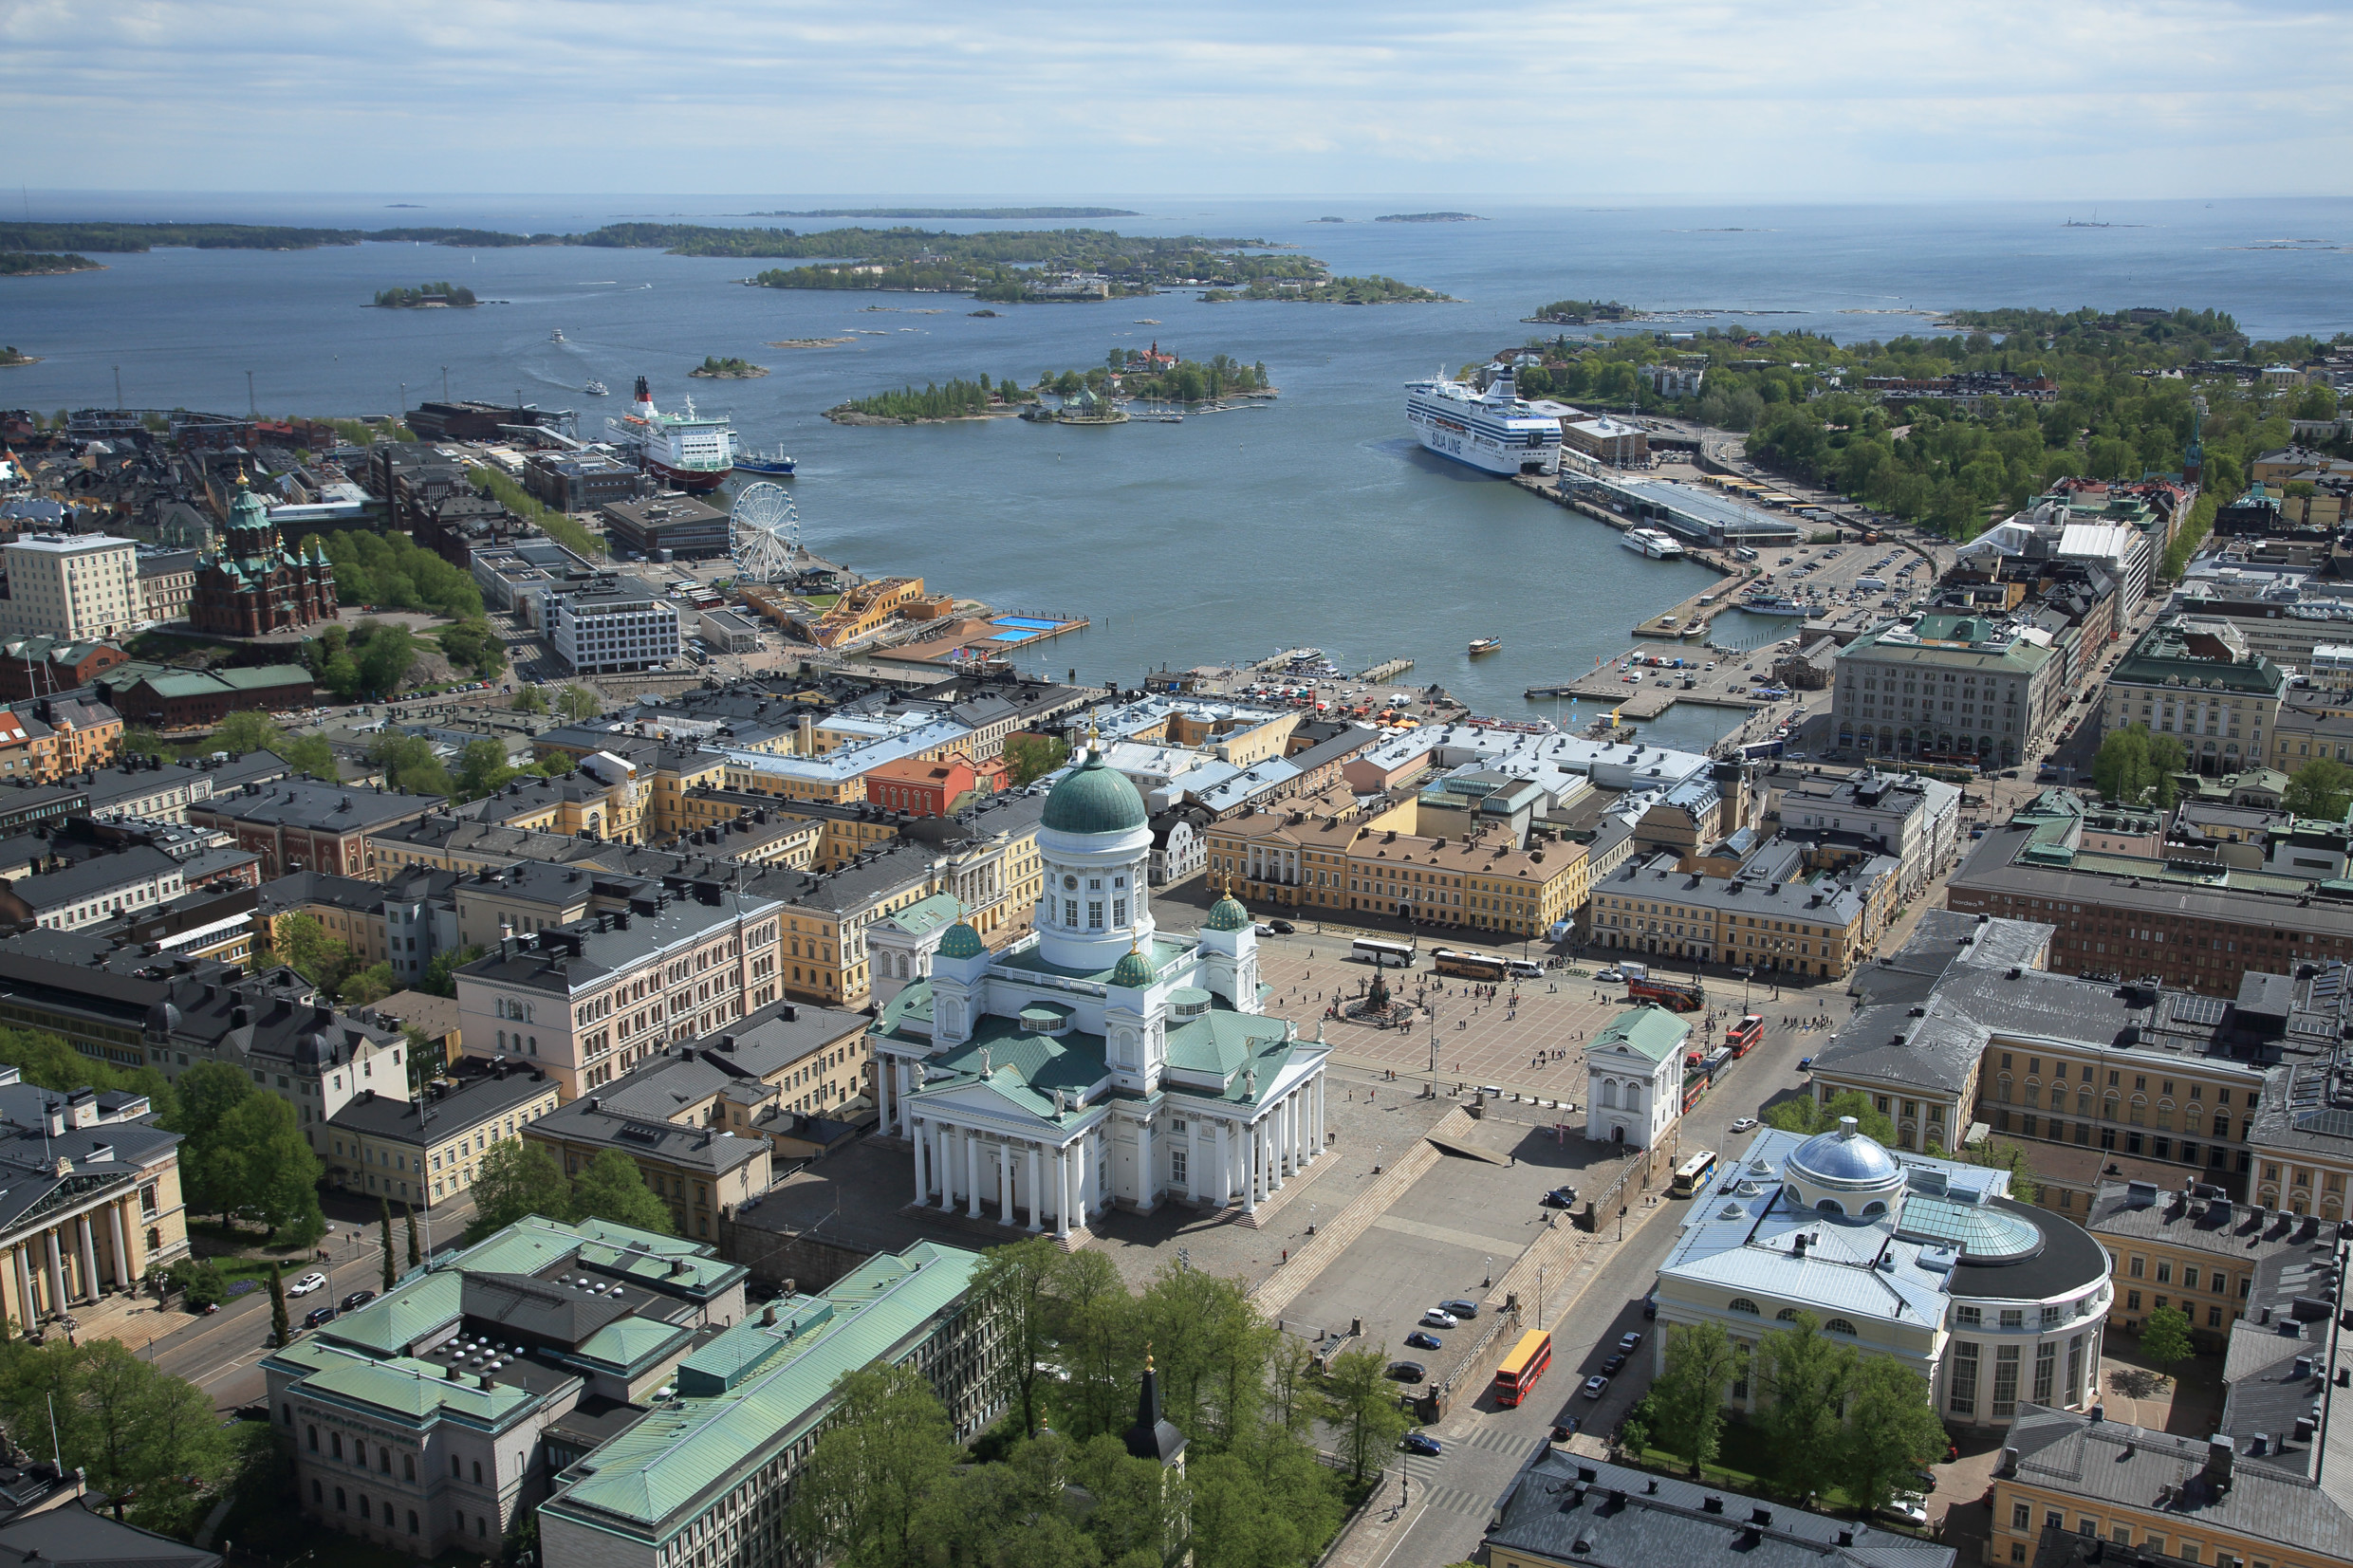 City of Helsinki seen from above